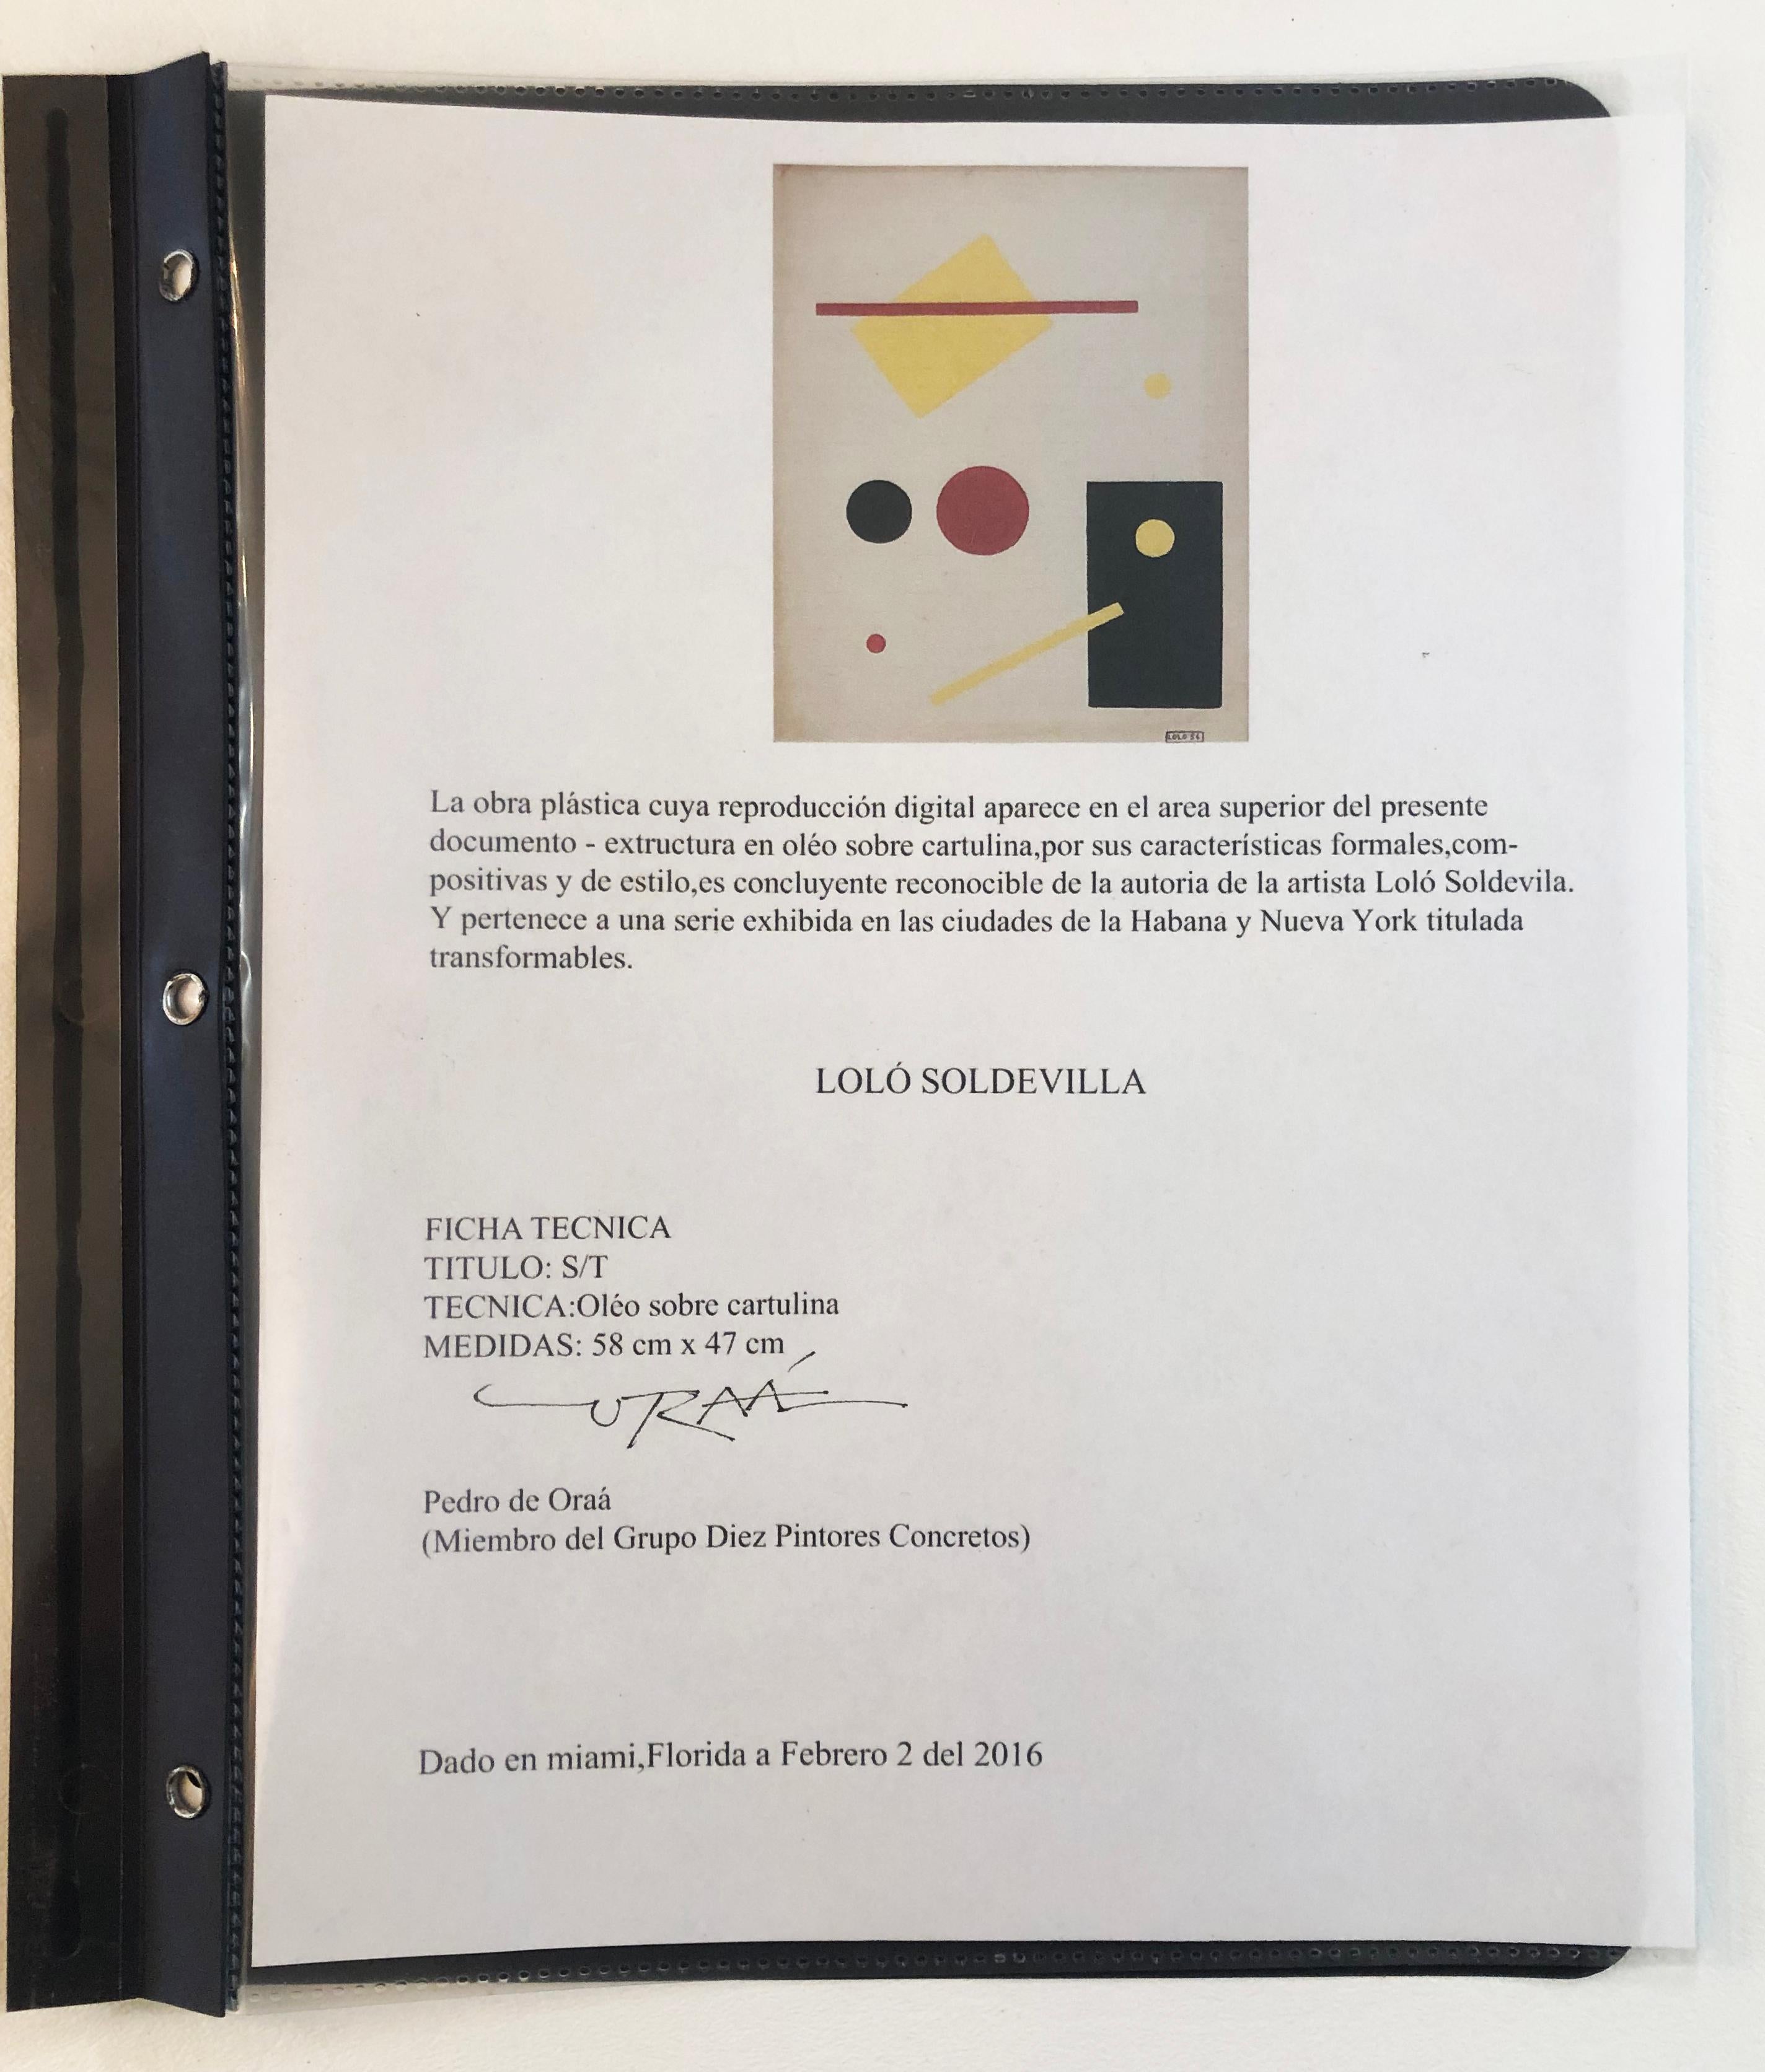 Lolo 'Dolores' Soldevilla Cuban Geometric Oil Painting, Signed & Dated 1956

Offered for sale is an original authenticated oil painting on board painting by Lolo Soldevilla (1901-1971) depicting abstract shapes in red, black, and yellow against a